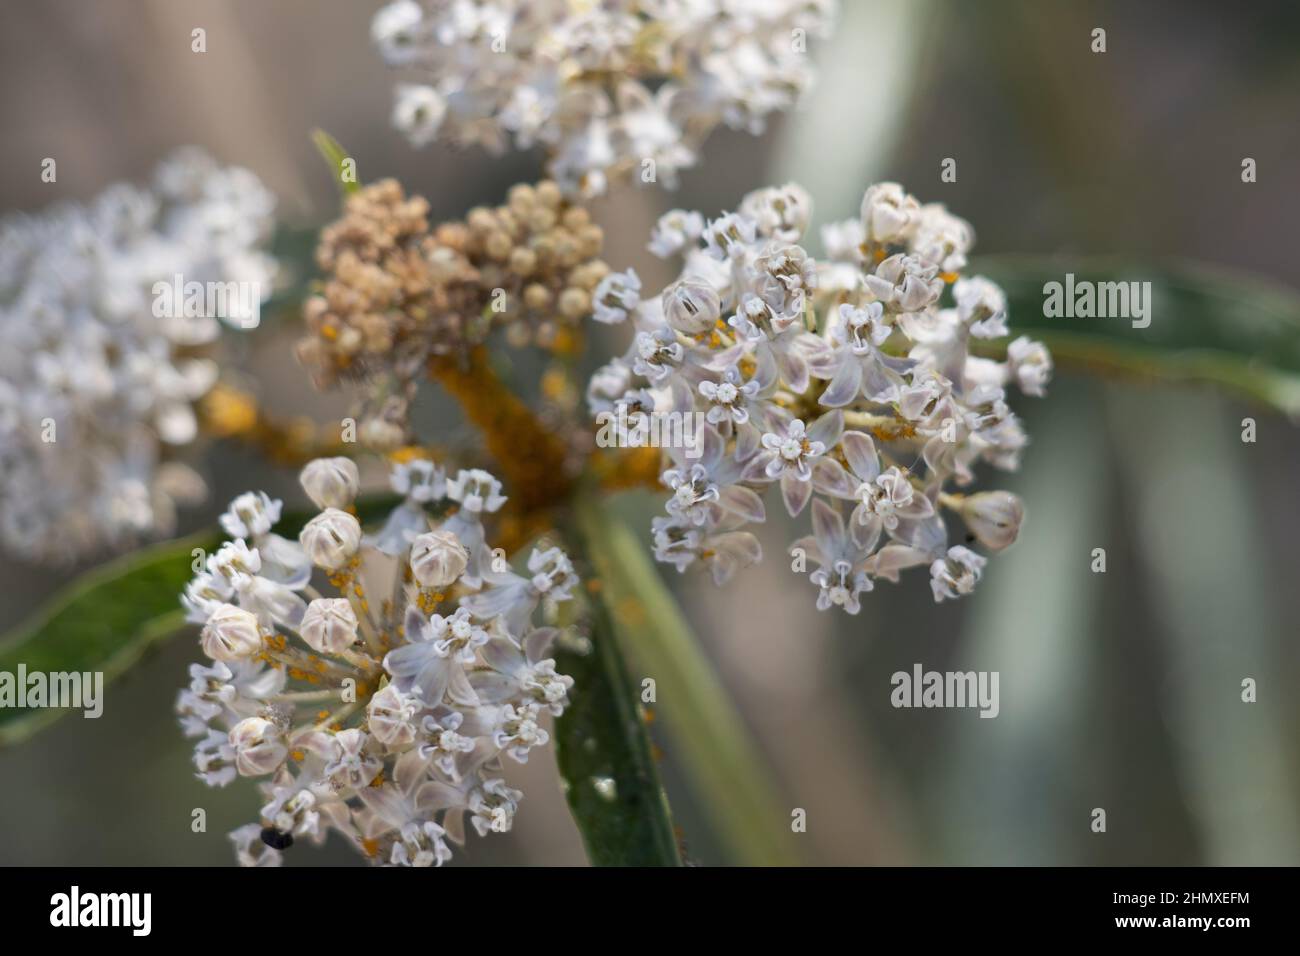 White flowering cymose umbel inflorescence of Asclepias Fascicularis, Apocynaceae, native perennial herb in the San Gabriel Mountains, Summer. Stock Photo